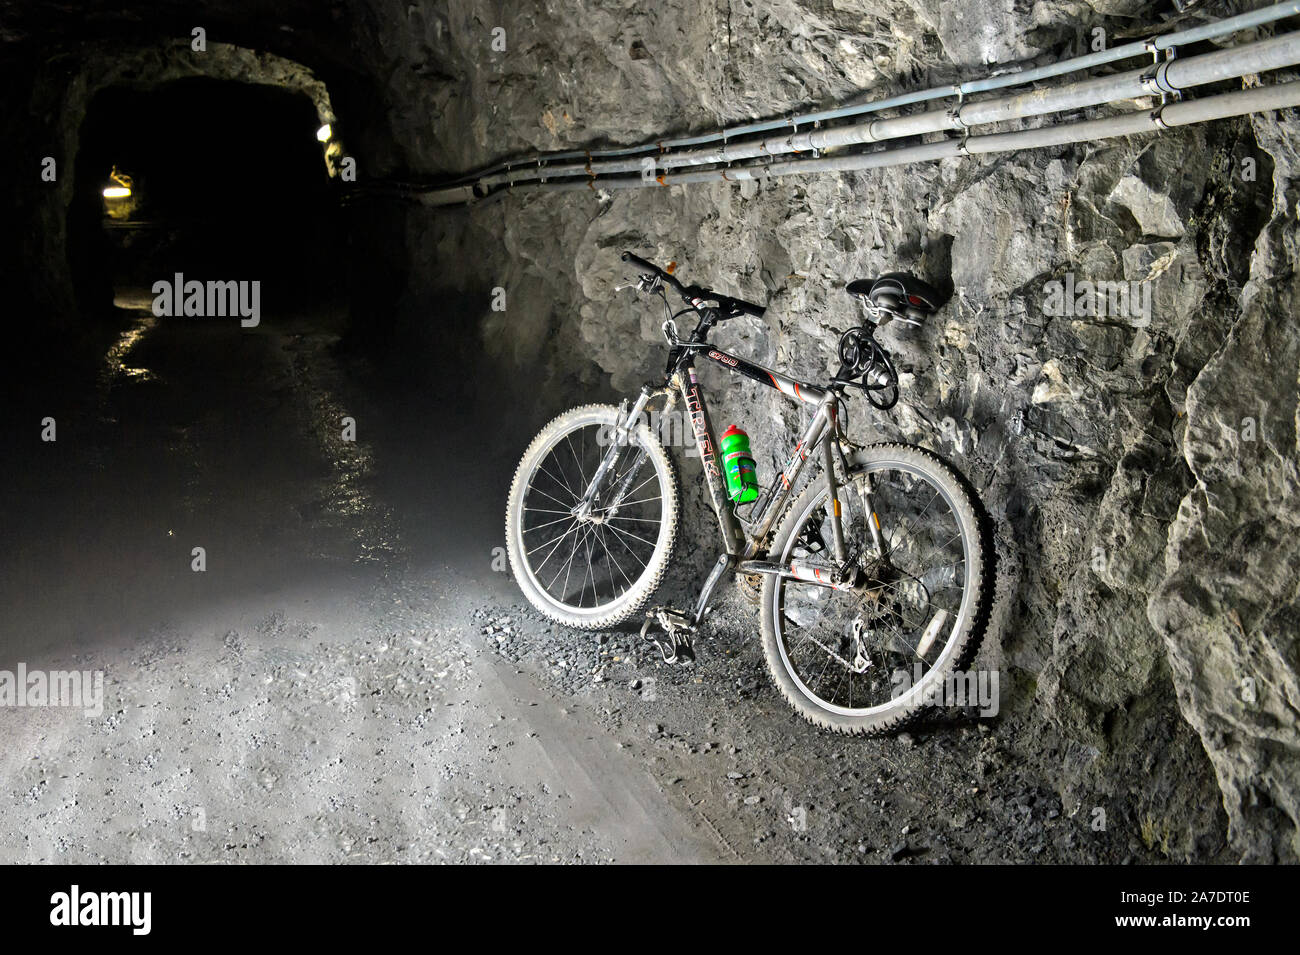 Mountain bike in a construction tunnel of the Mauvoisin water reservoir, Lac de Mauvoisin, Val de Bagnes, Valais, Switzerland Stock Photo